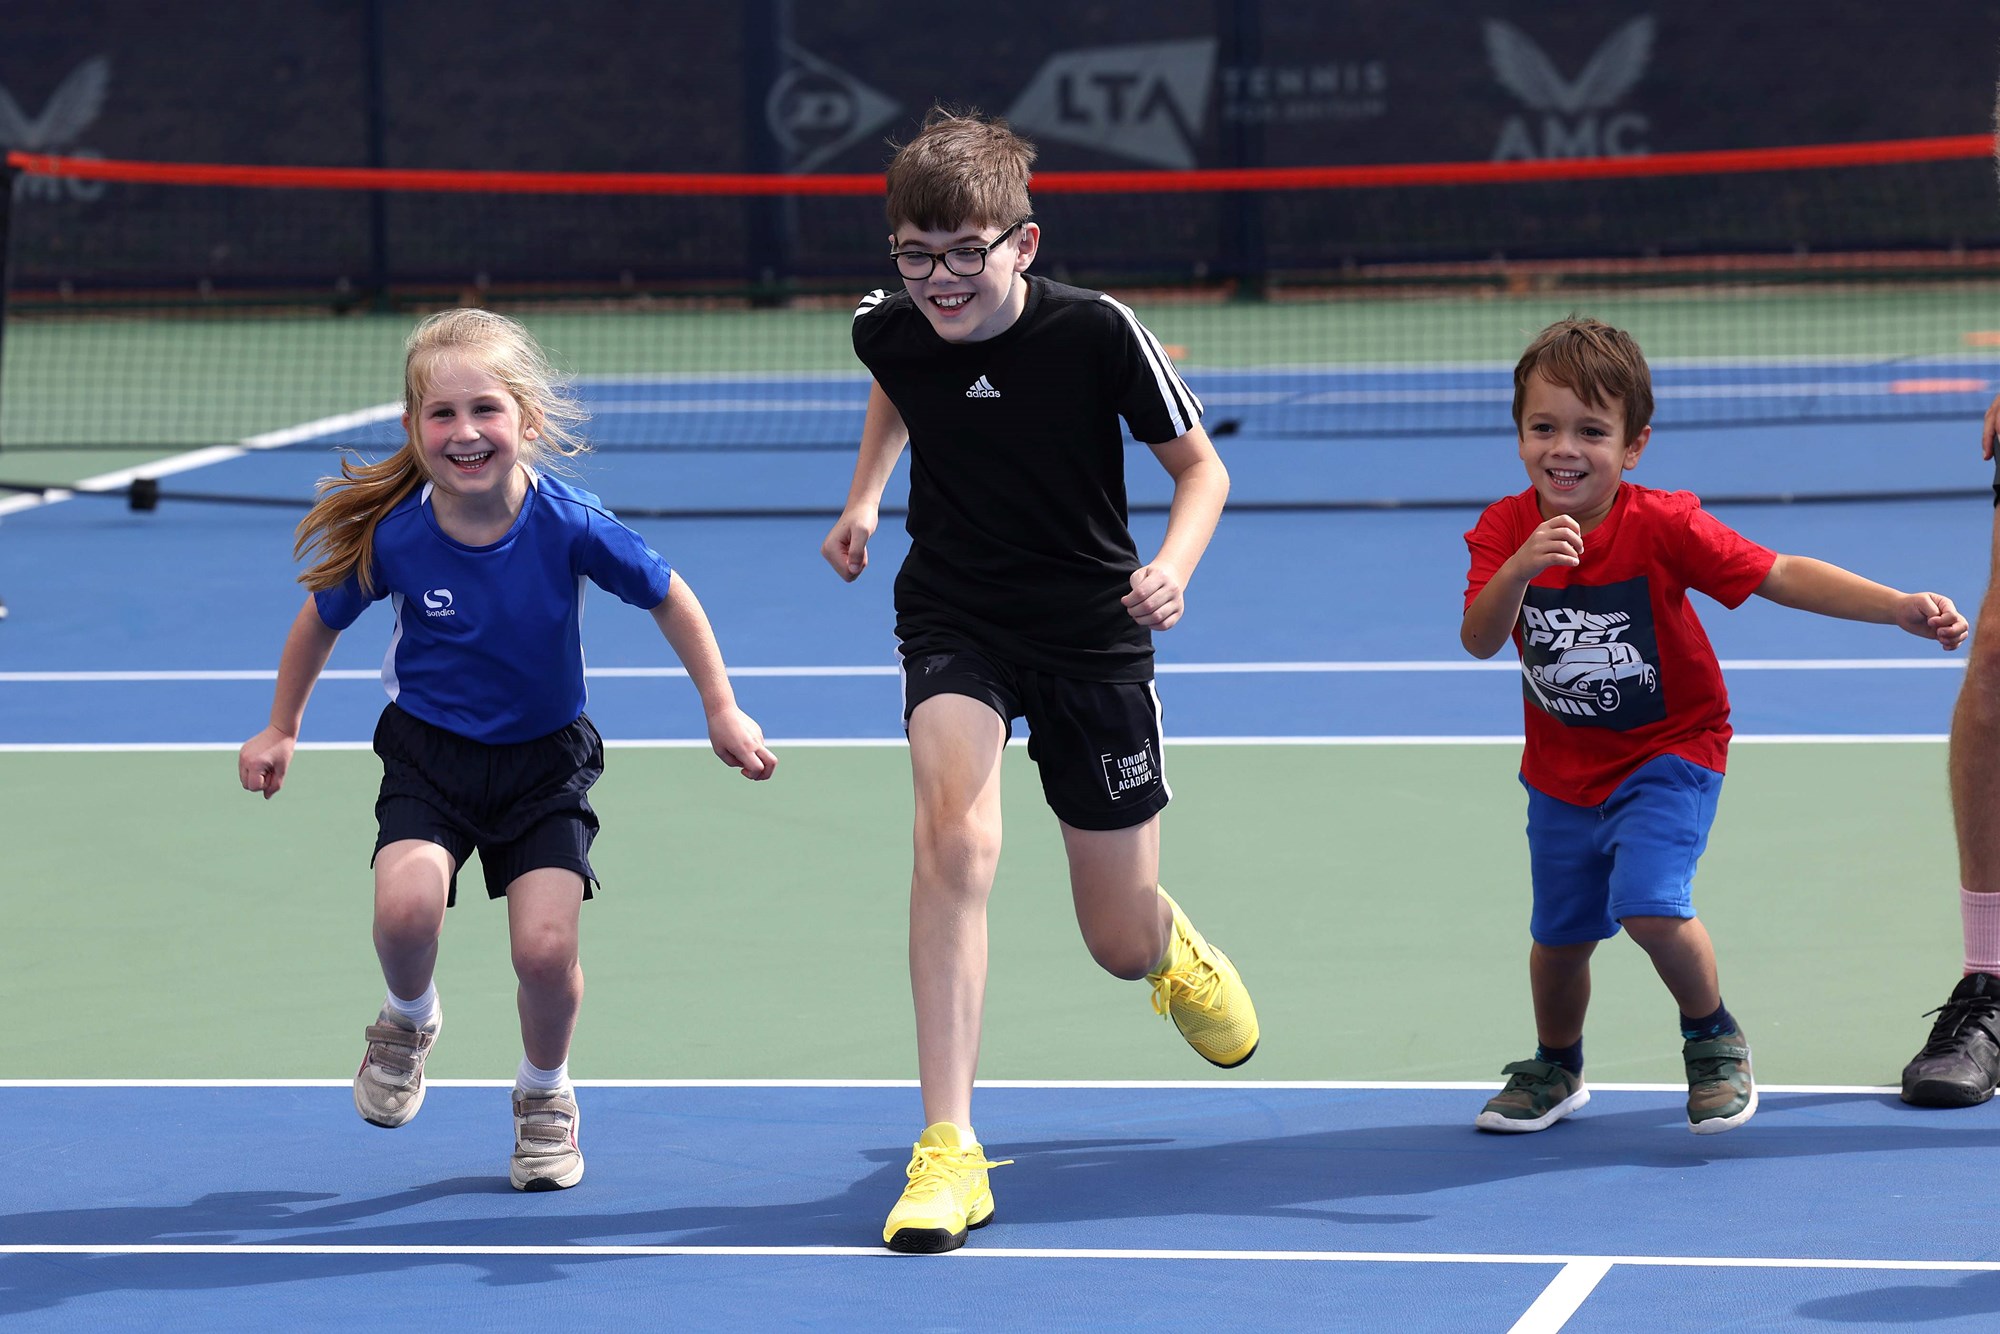 Kids who attended the youth session at the Deaf Nationals Festival racing on court at the National Tennis Centre